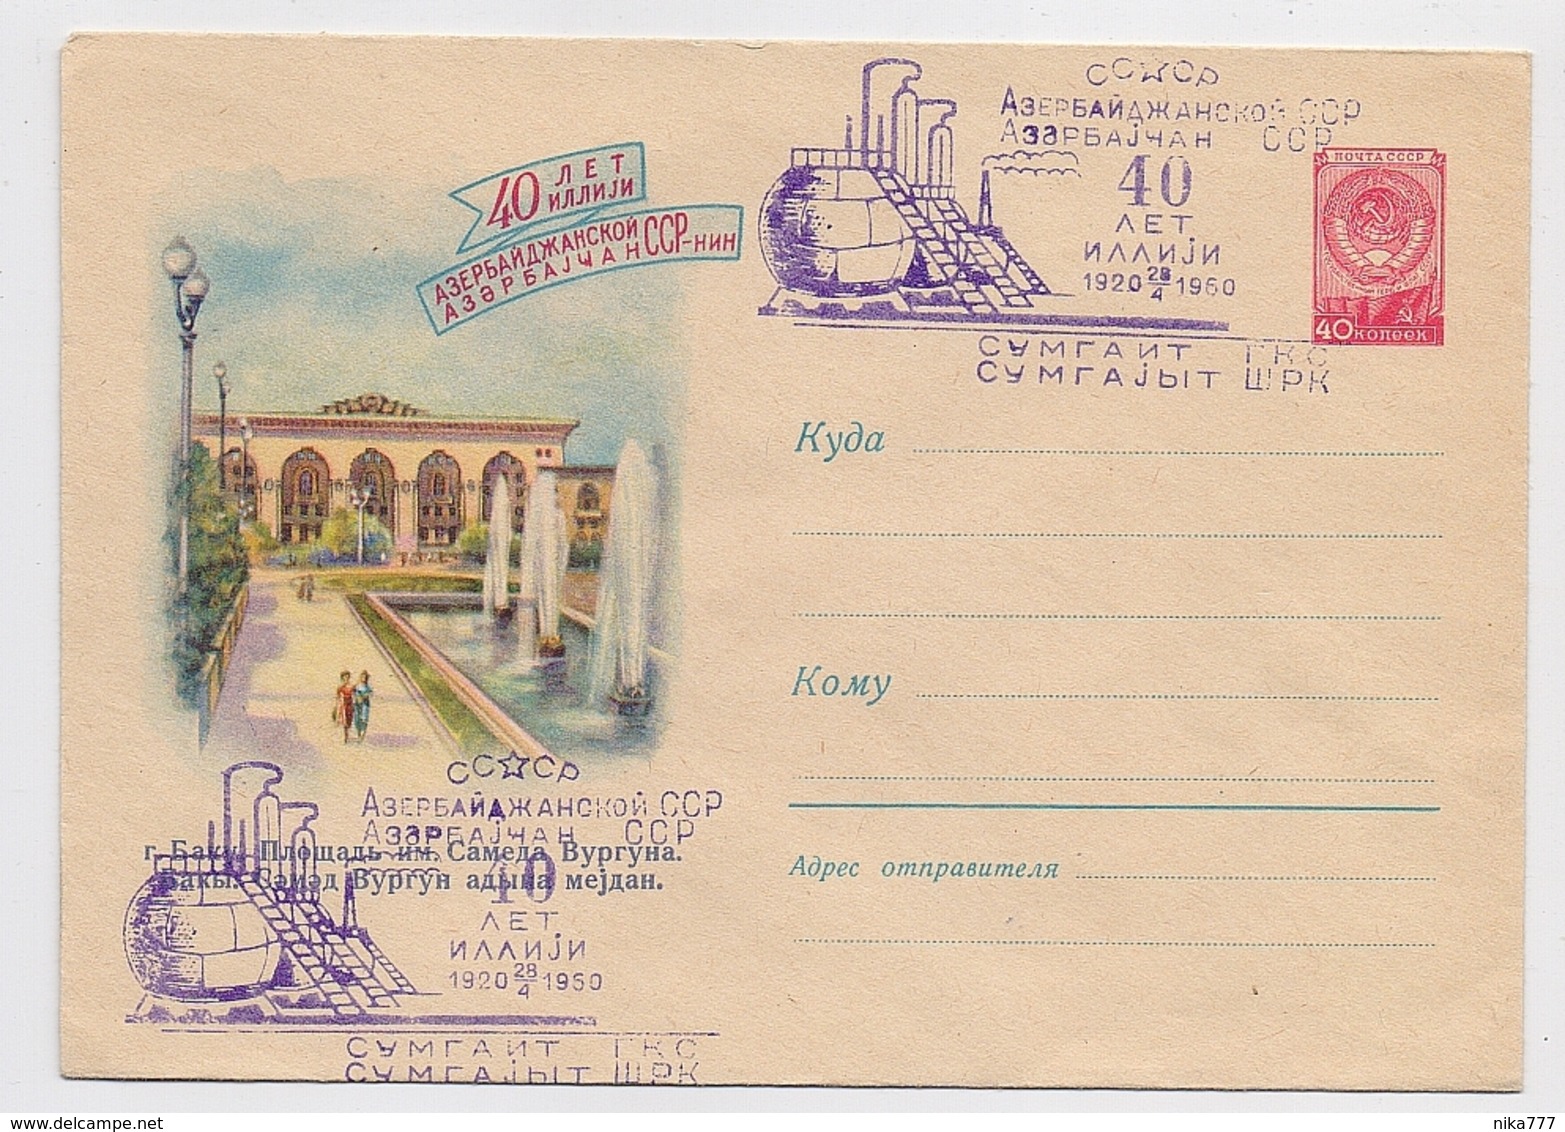 Stationery Used 1960 Cover USSR RUSSIA Oil Azerbaijan Sumgait - 1950-59